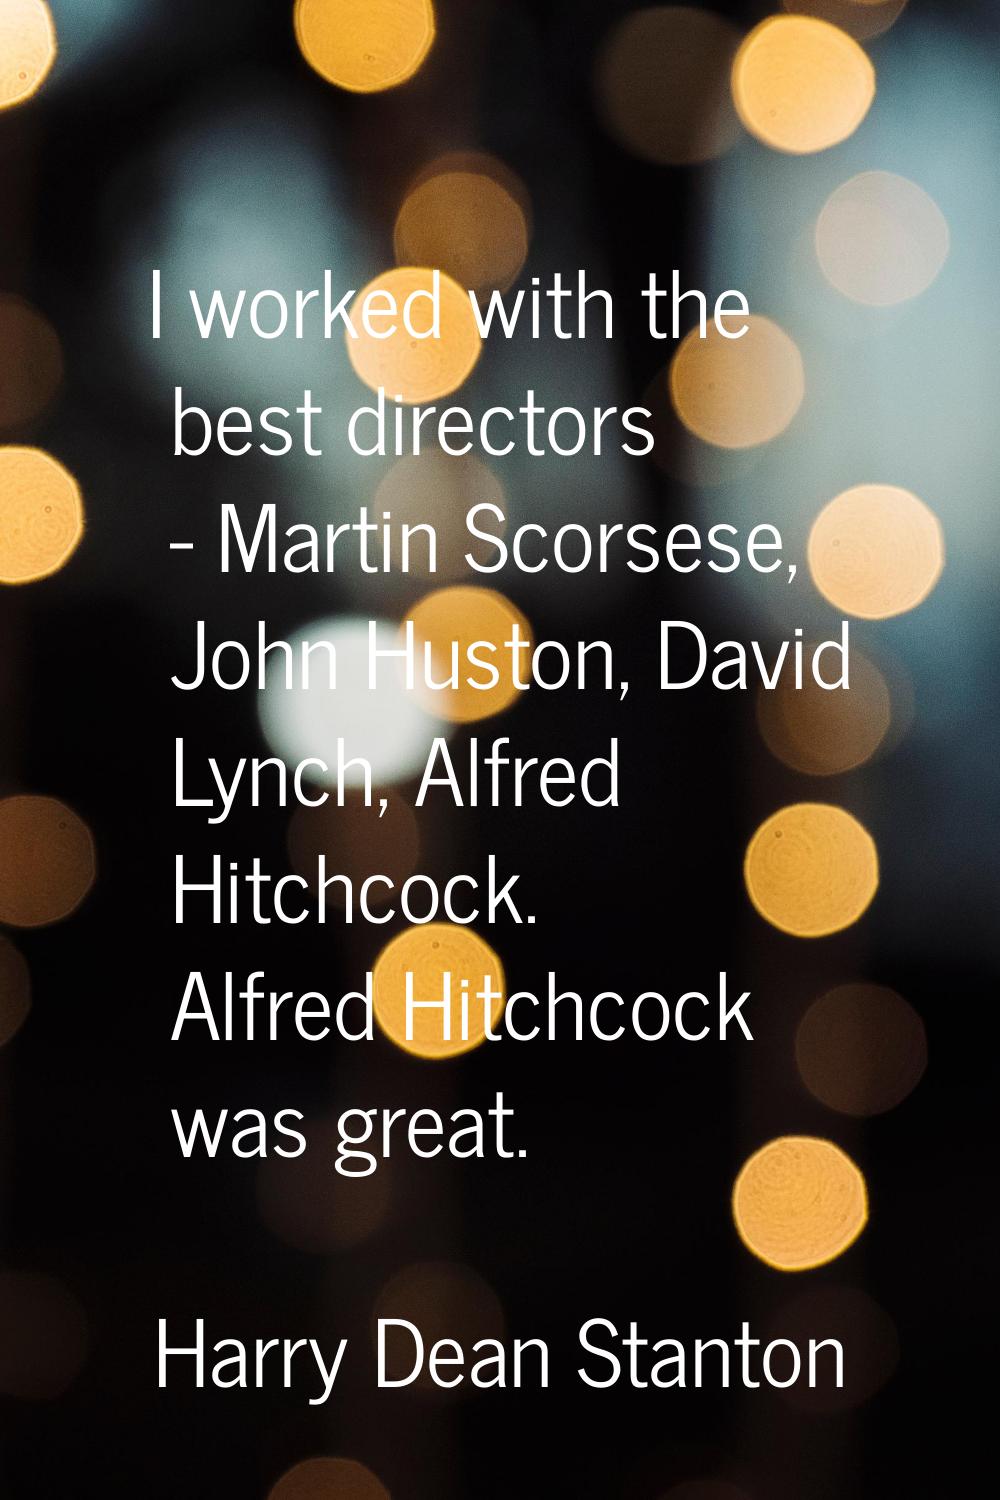 I worked with the best directors - Martin Scorsese, John Huston, David Lynch, Alfred Hitchcock. Alf